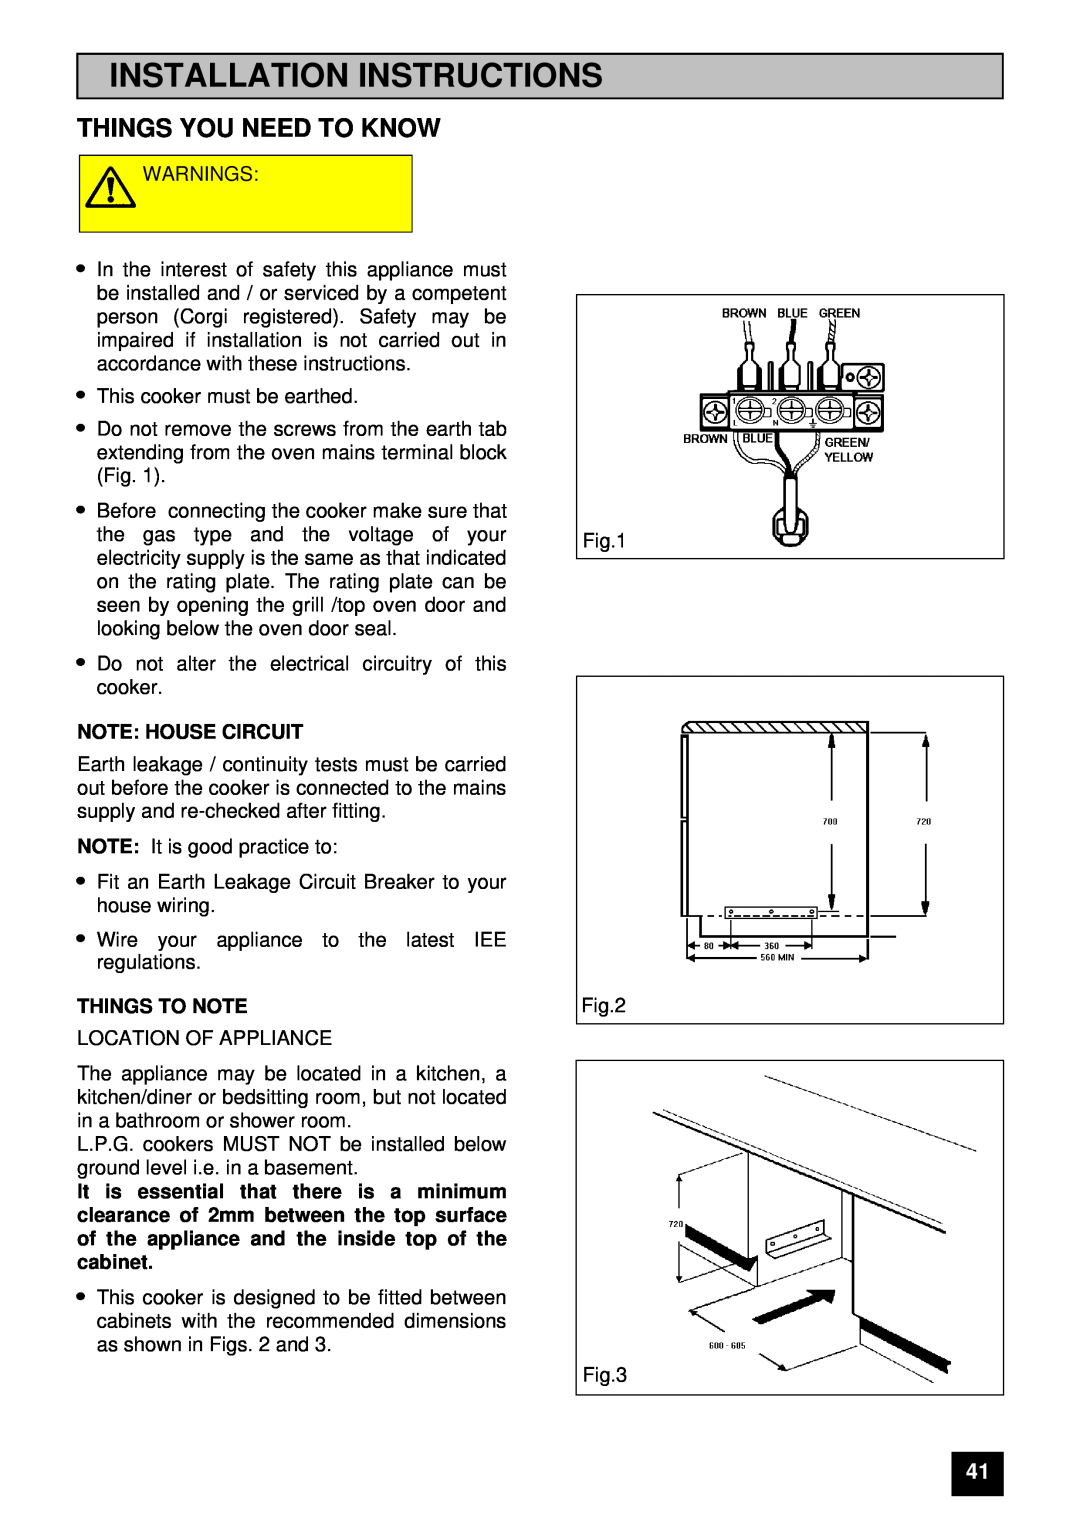 Zanussi ZUG 78 manual Installation Instructions, Things You Need To Know, Note House Circuit, Things To Note 